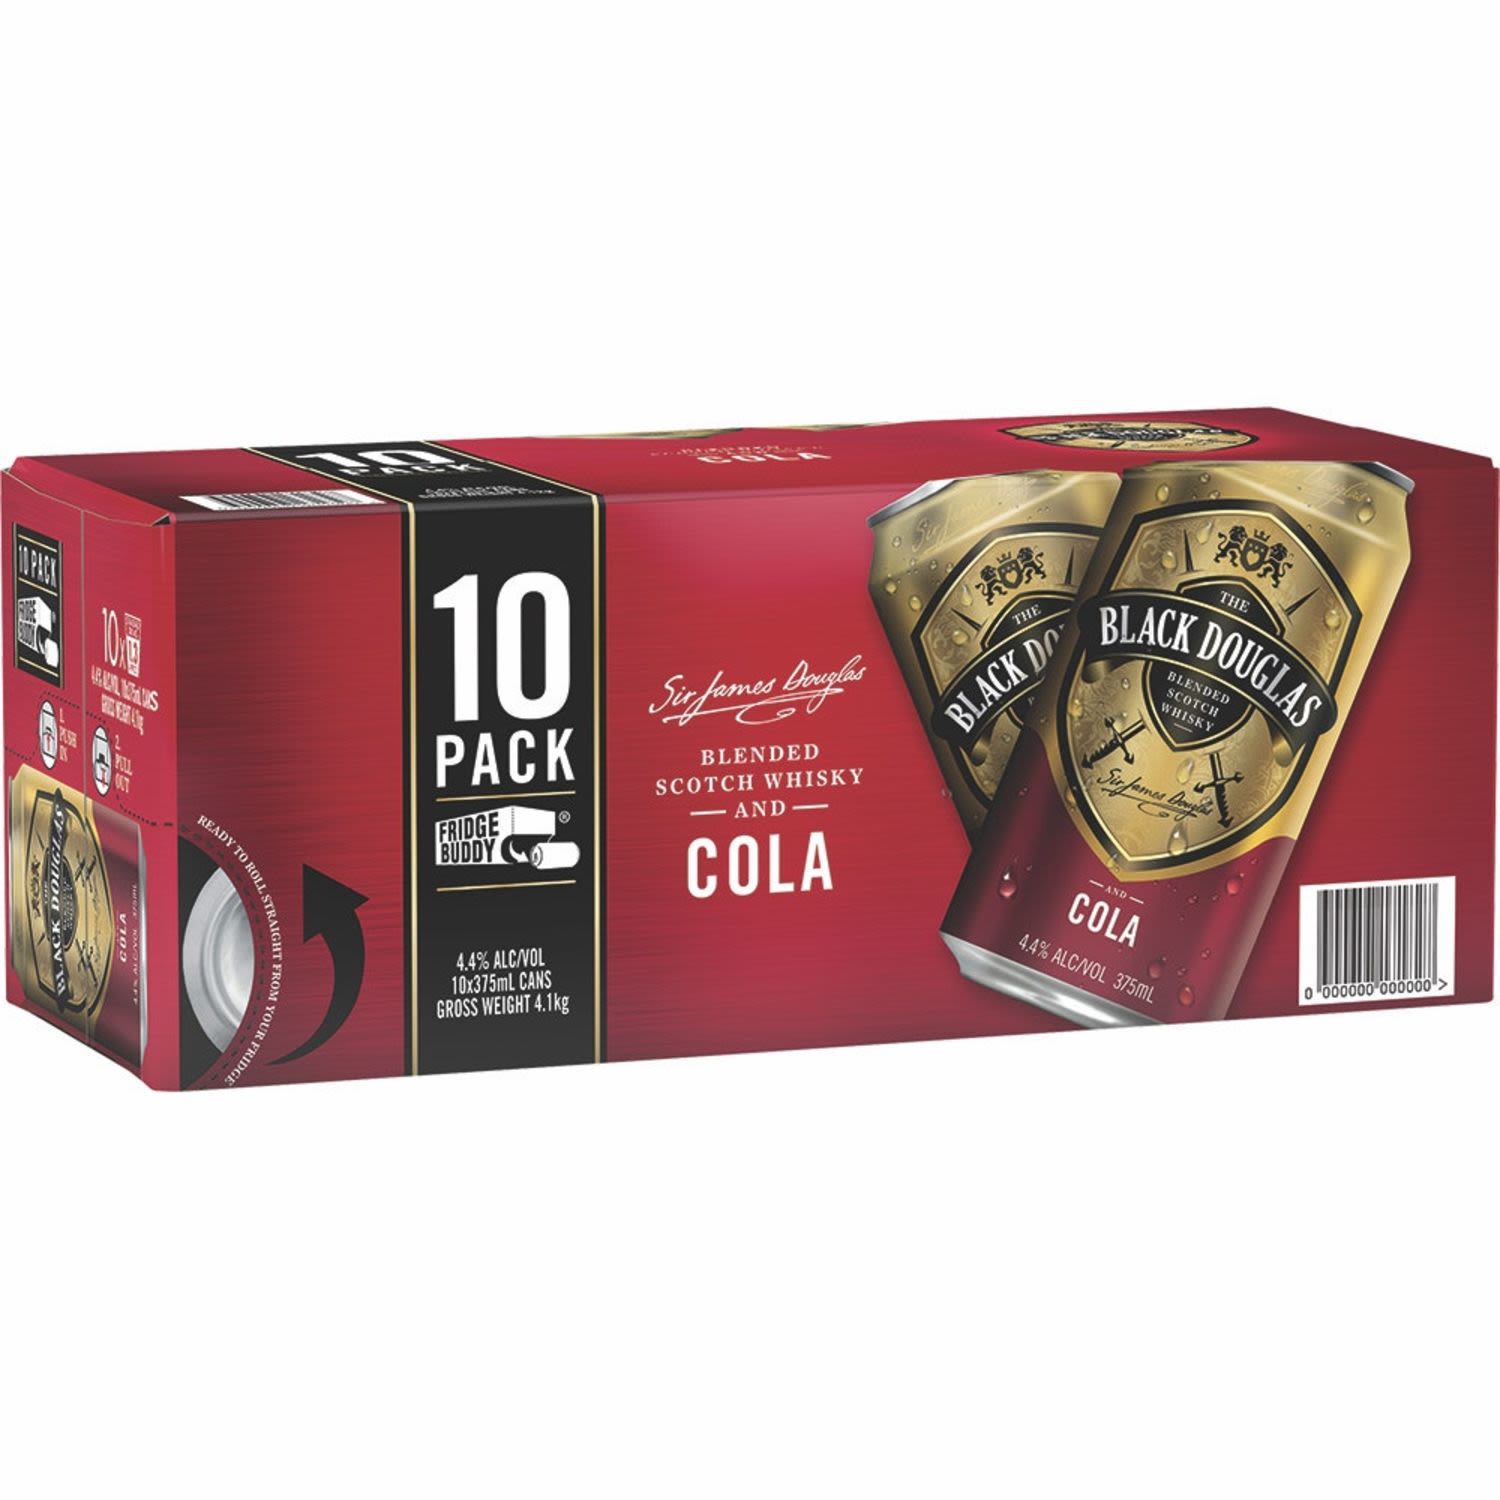 Black Douglas Whisky & Cola 4.4% Can 375mL 10 Pack